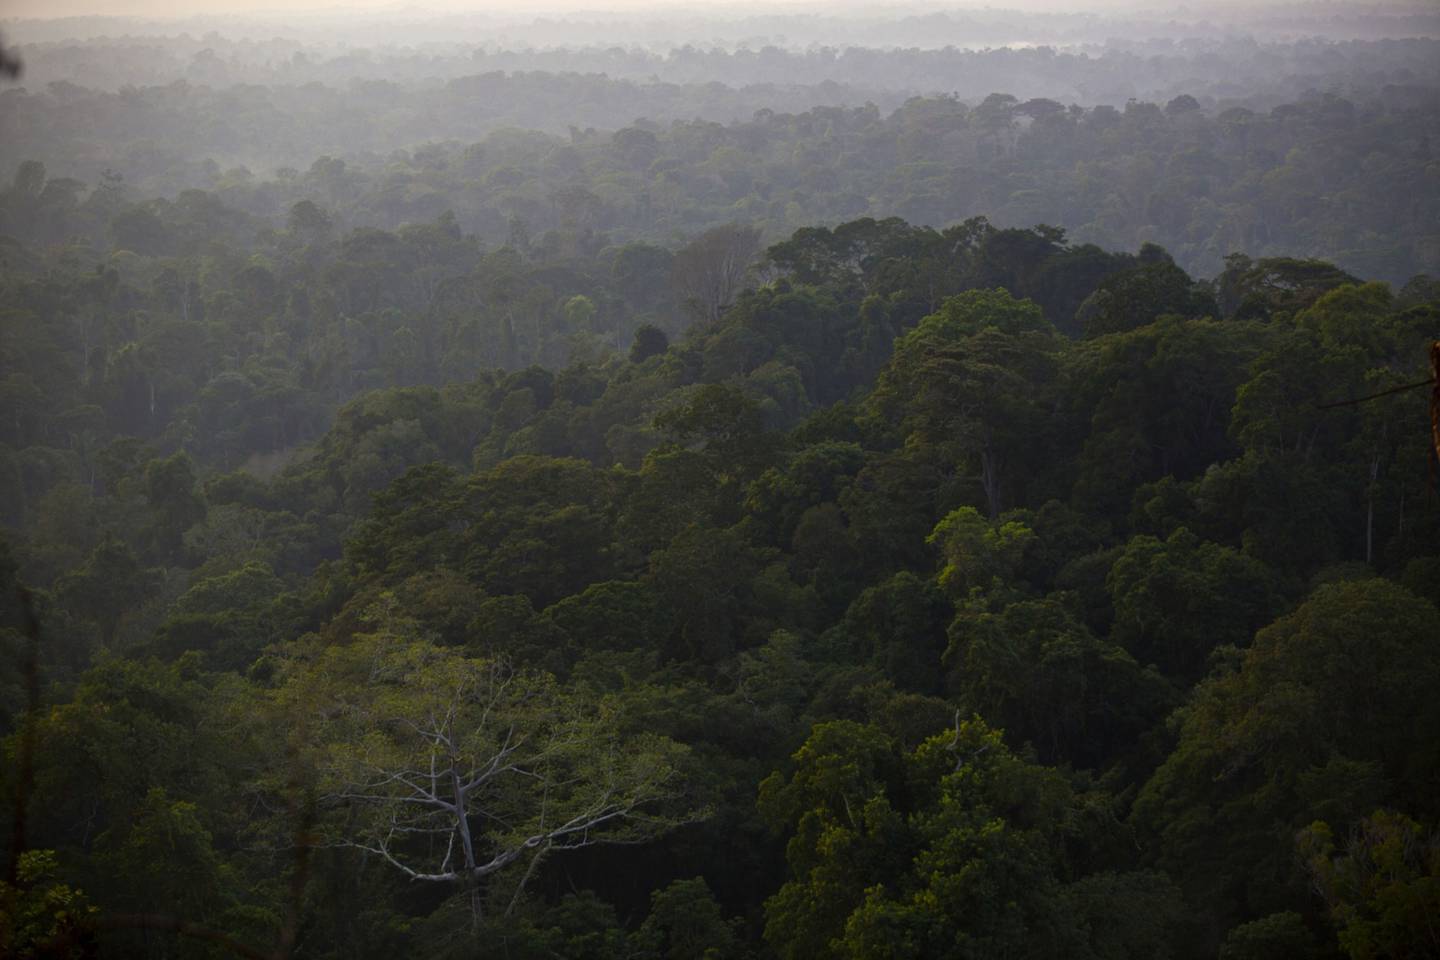 Trees stand in the rainforest in the southern part of the Amazonian state of Para, near Belo Monte, Brazil. The rate of deforestation of Brazil's Amazon rainforest dropped 18% over the last year, according to a report by the country's environment minister in November.